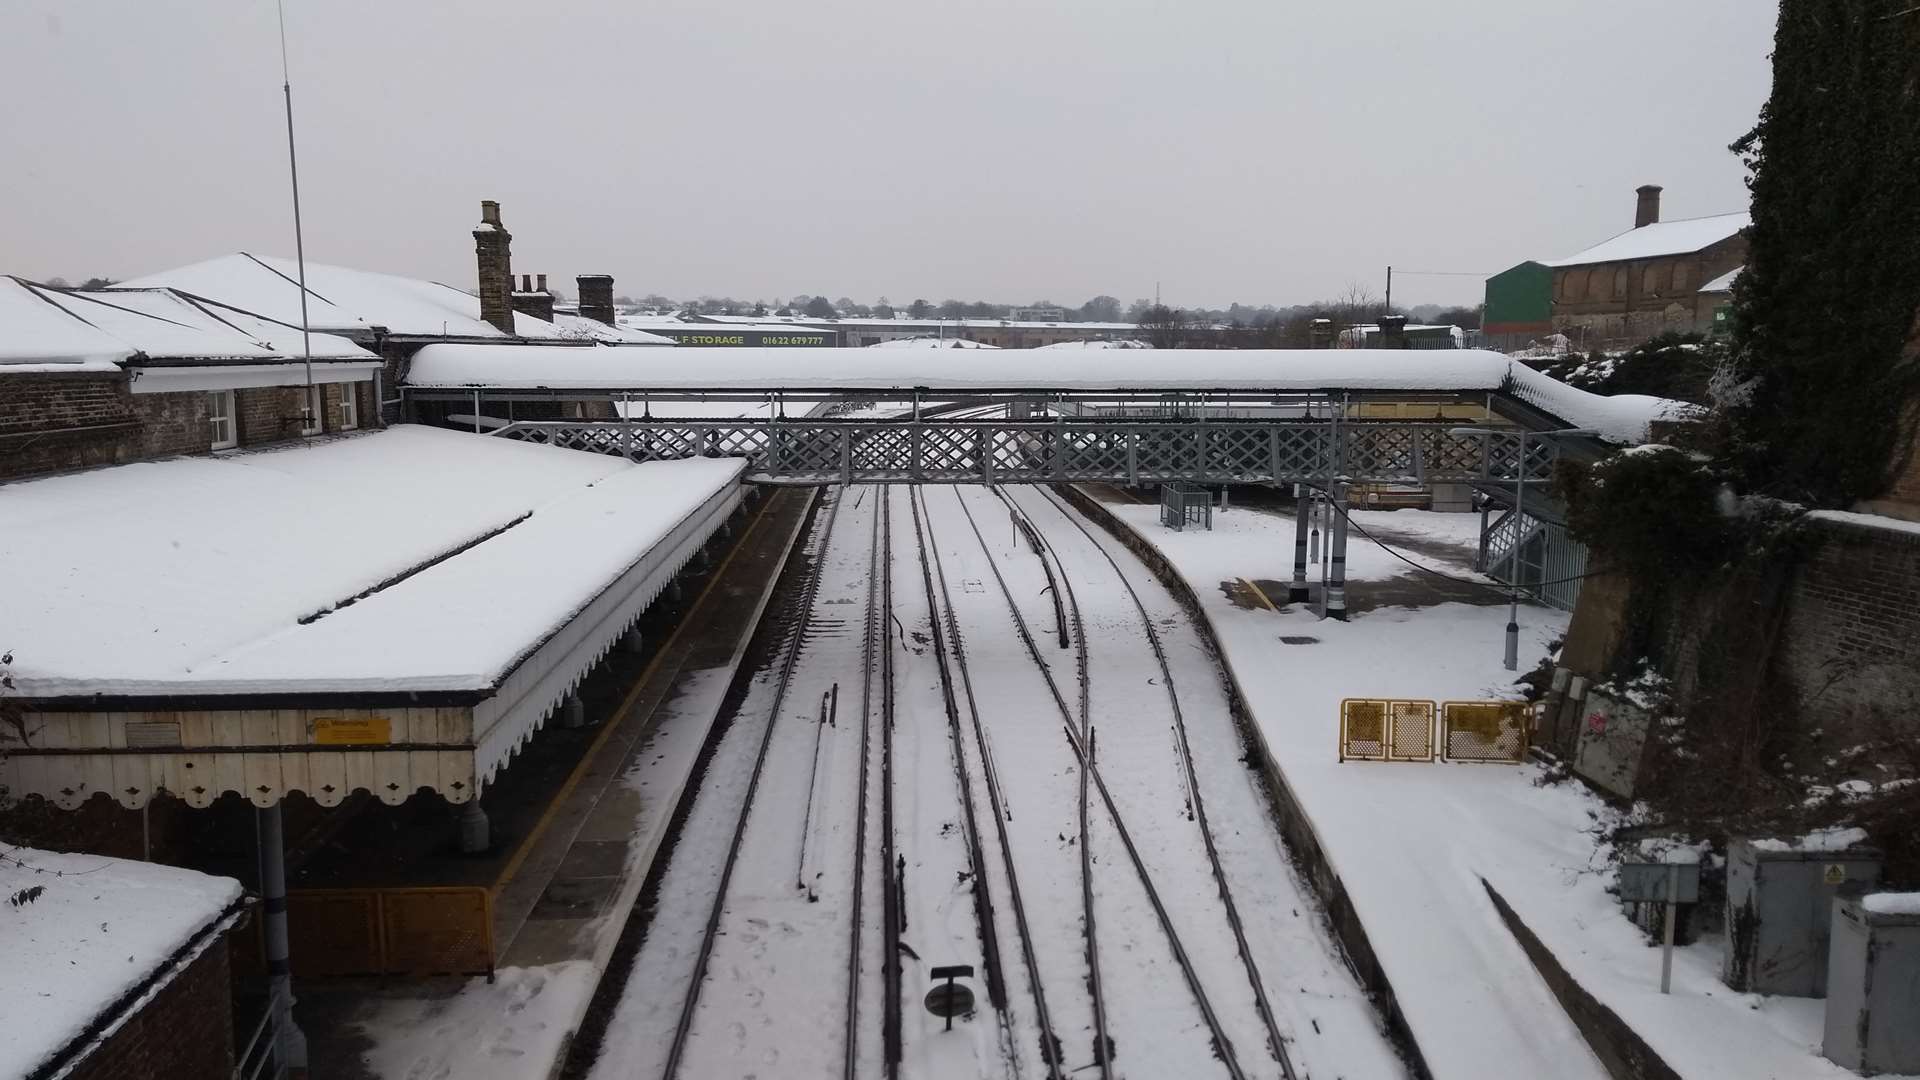 The Medway Valley line is running no service due to weather conditions.